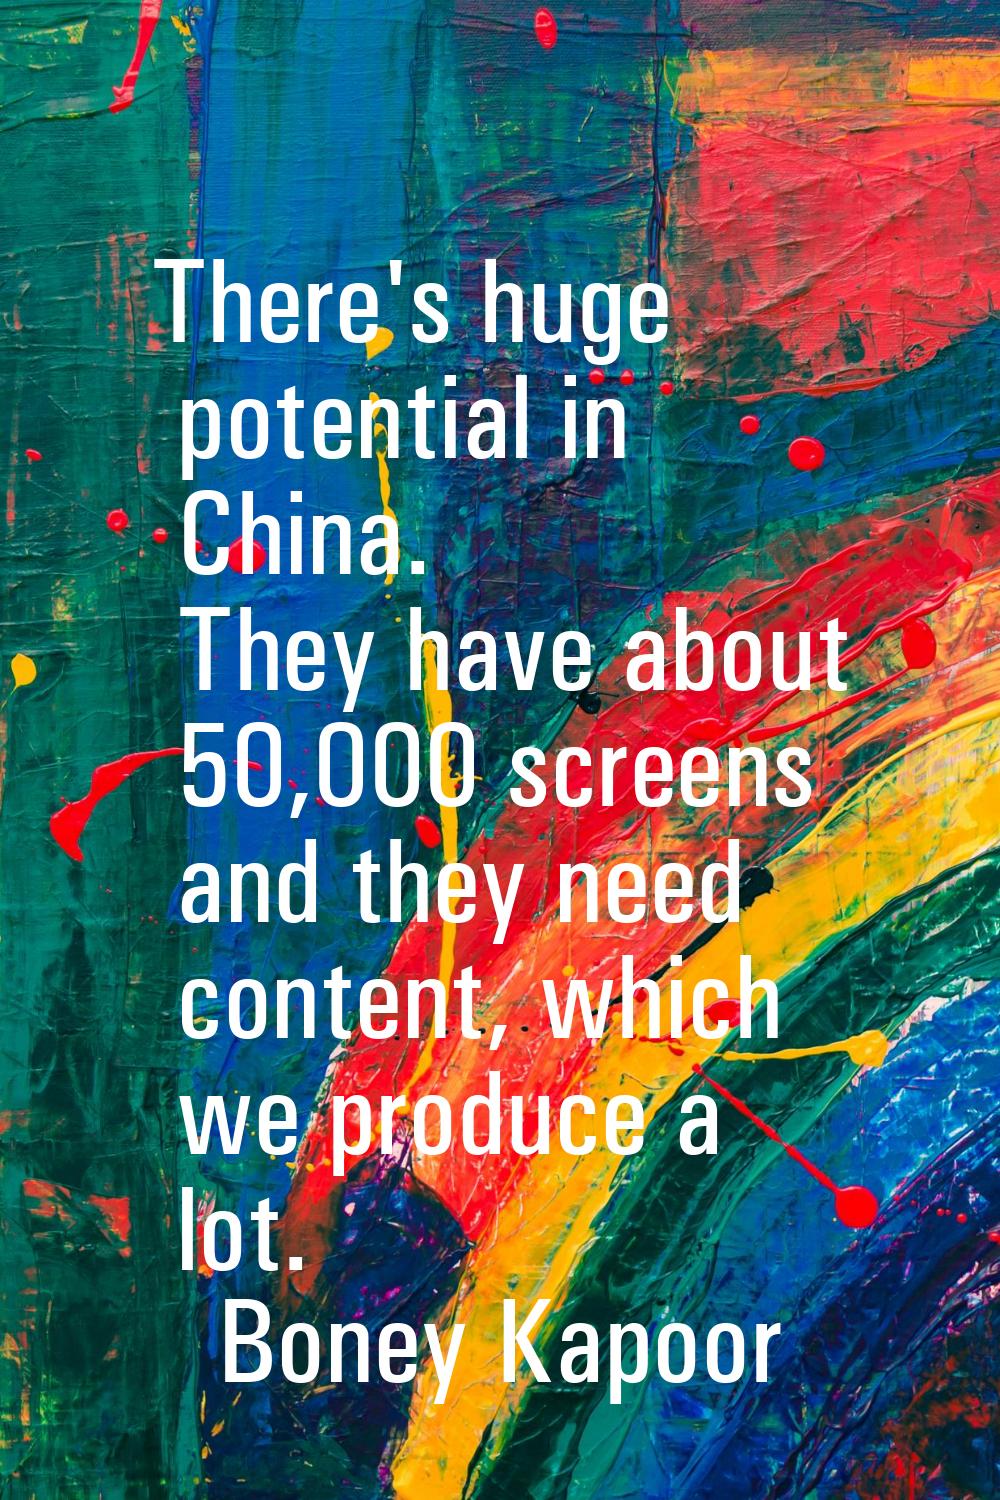 There's huge potential in China. They have about 50,000 screens and they need content, which we pro